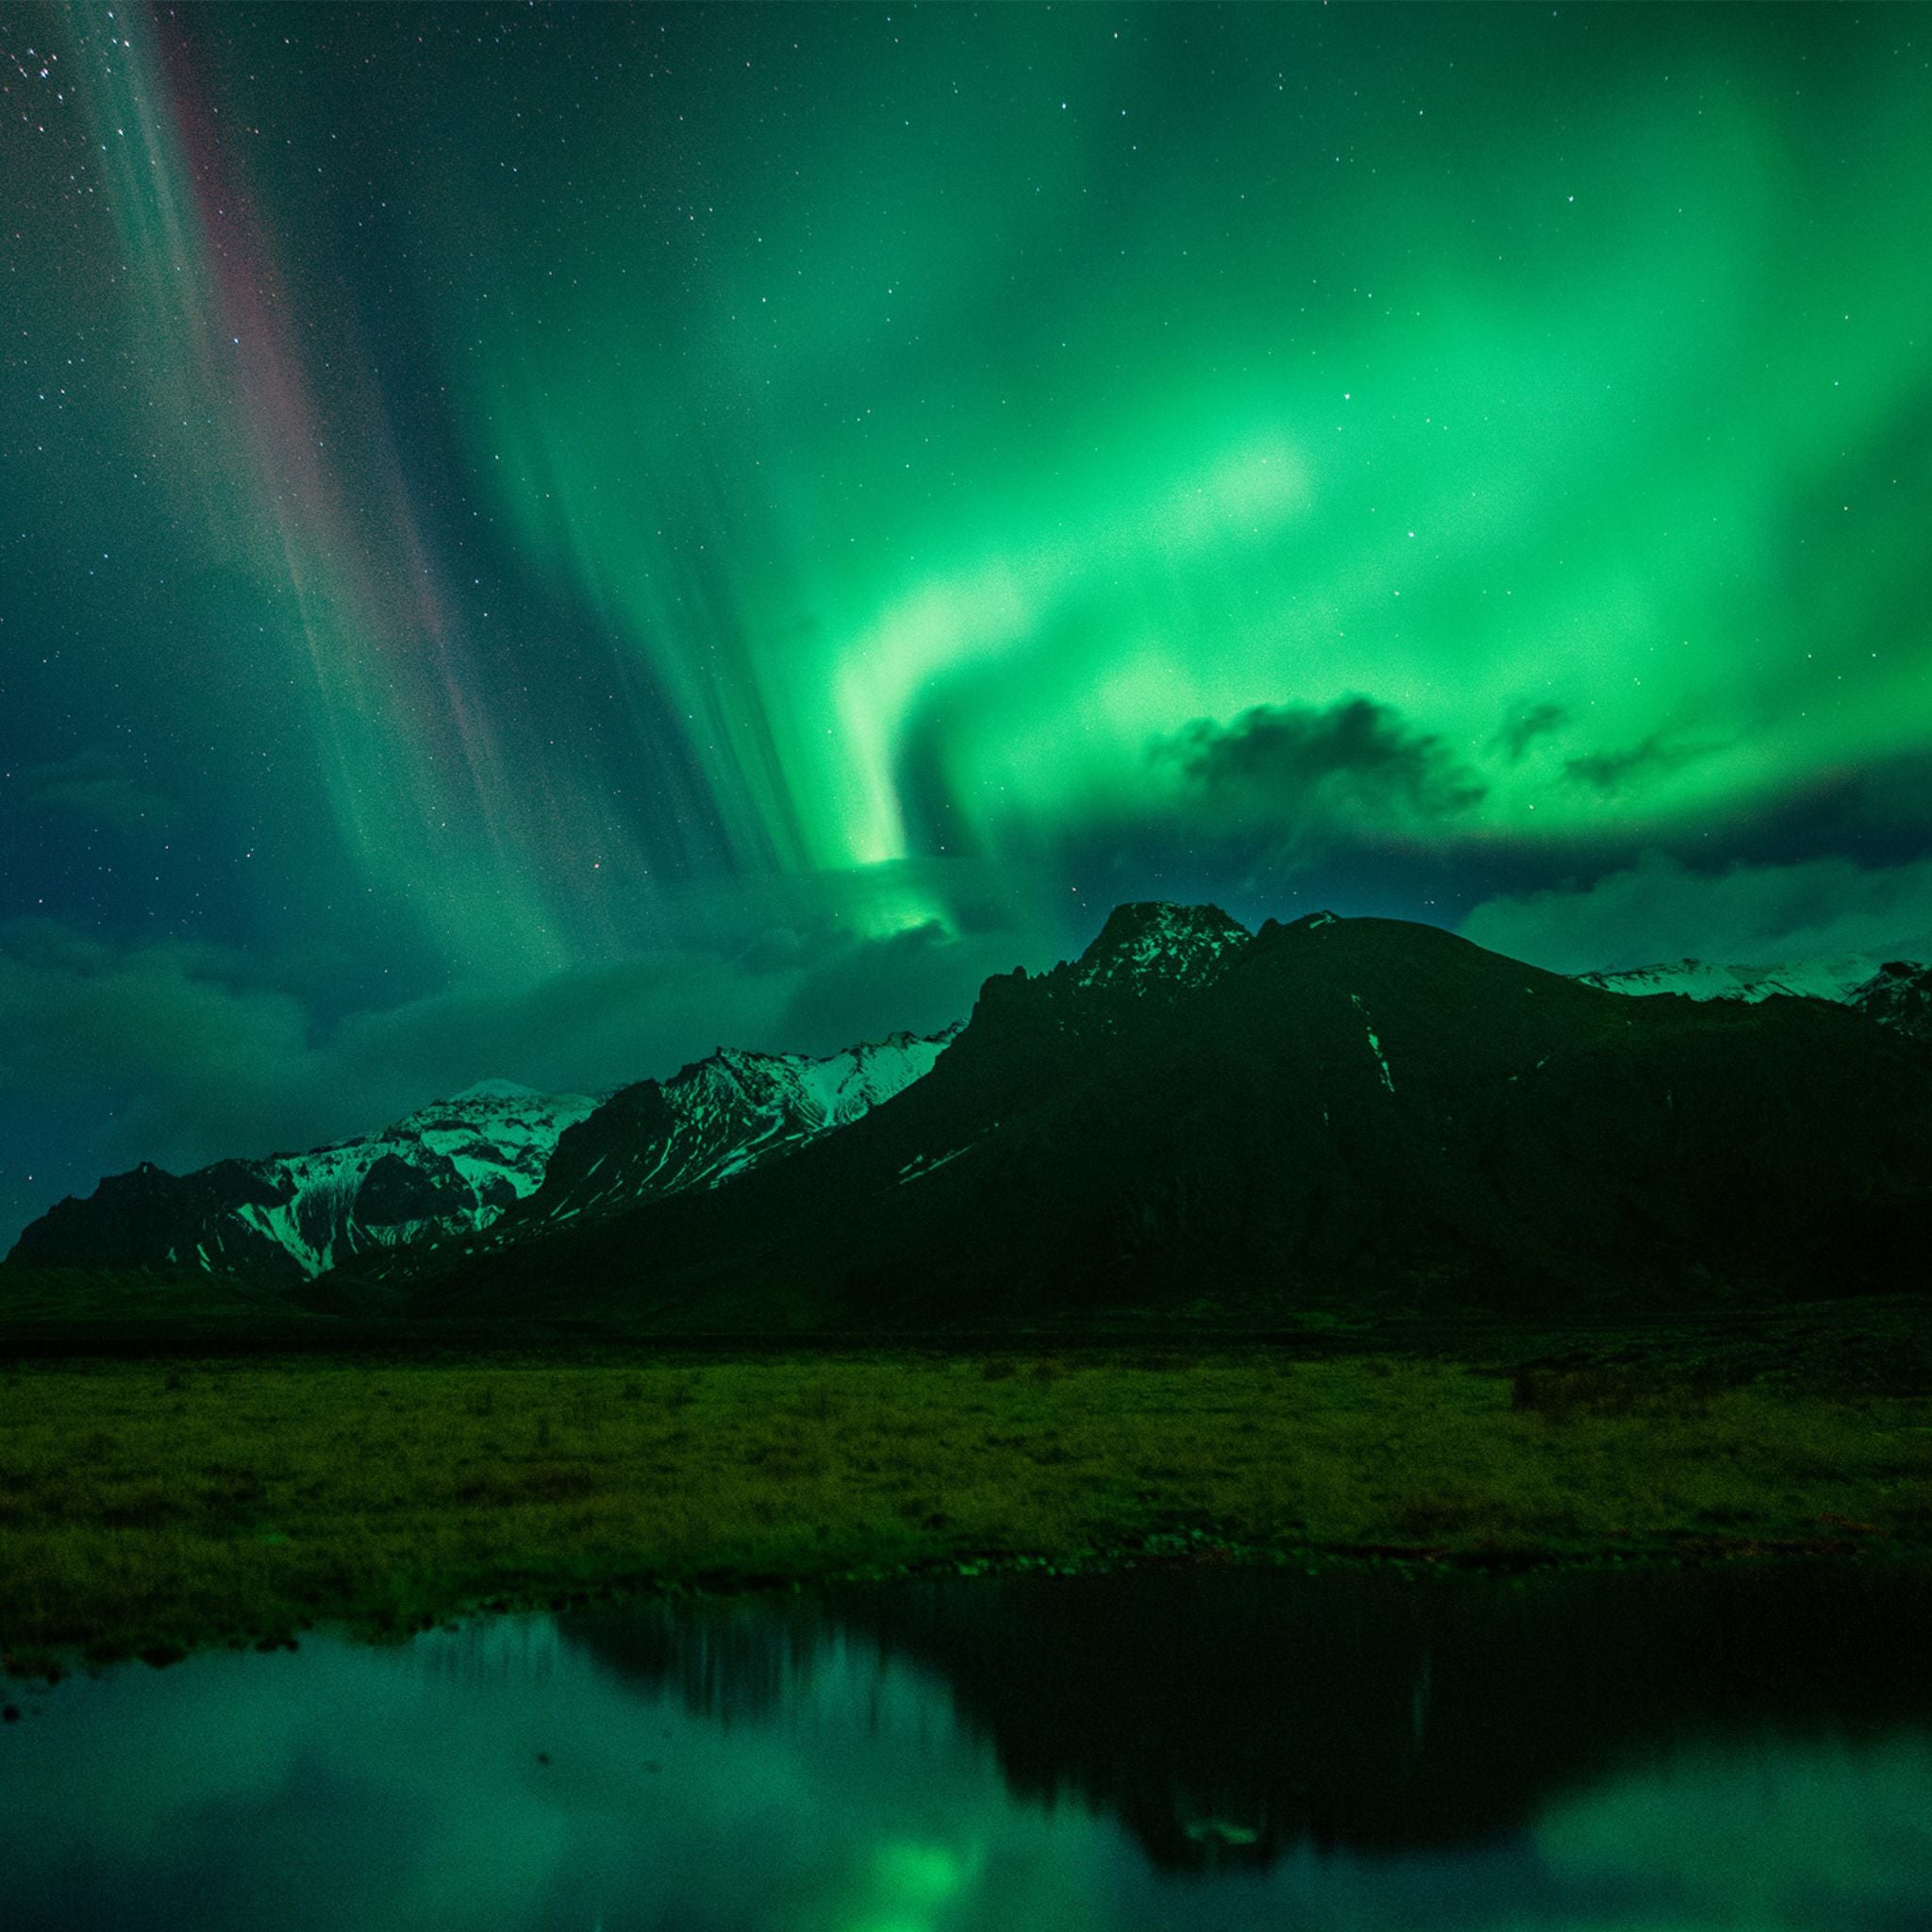 Vibrant green Northern lights over a mountain